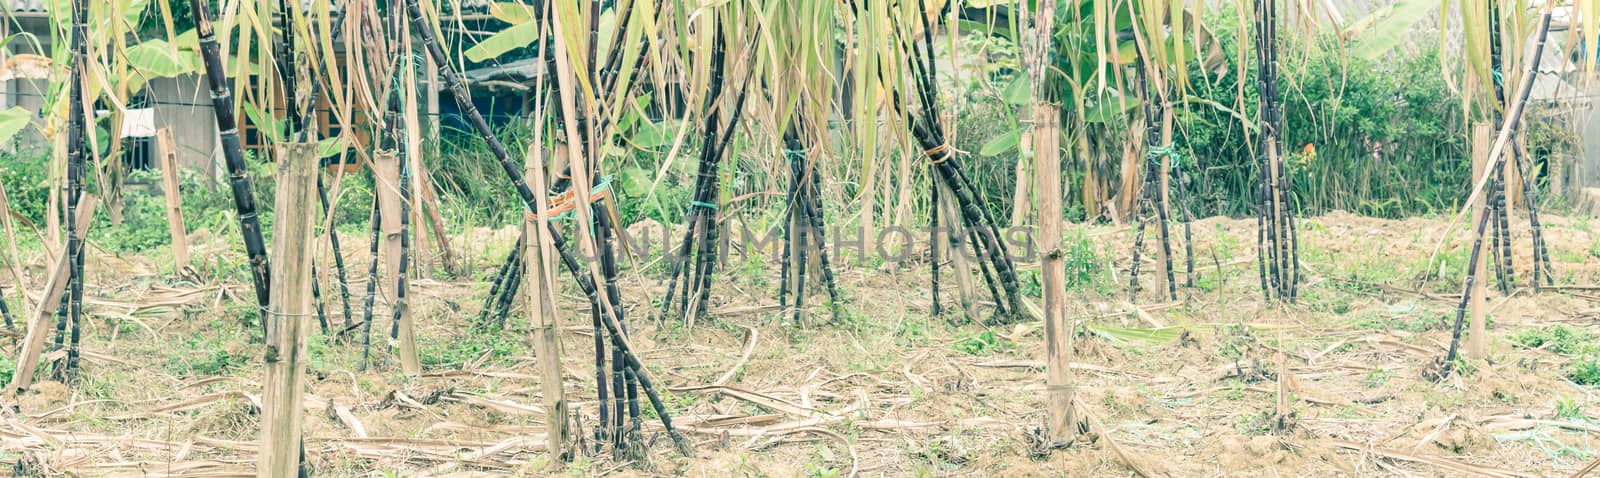 Panorama organic sugarcane farm in country side of the North Vietnam. Healthy purple sugar cane stick stalks and green long leaves growing with bamboo trellis stake support